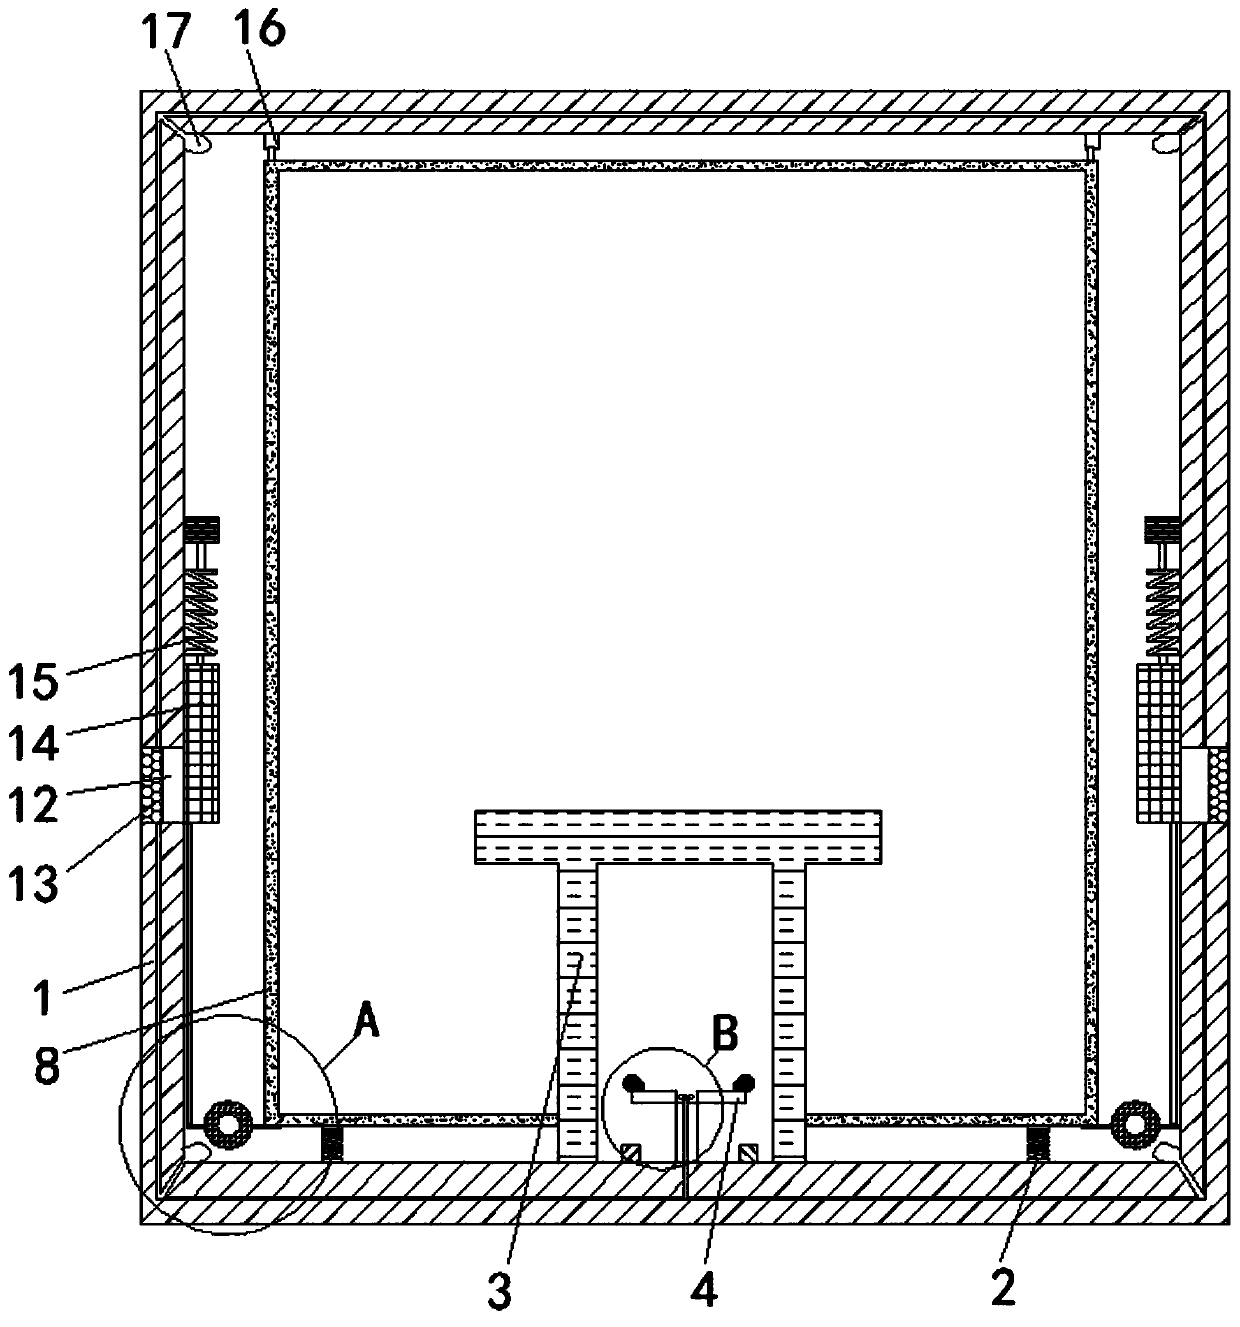 Damp-proof instrument placing box capable of being automatically ventilated